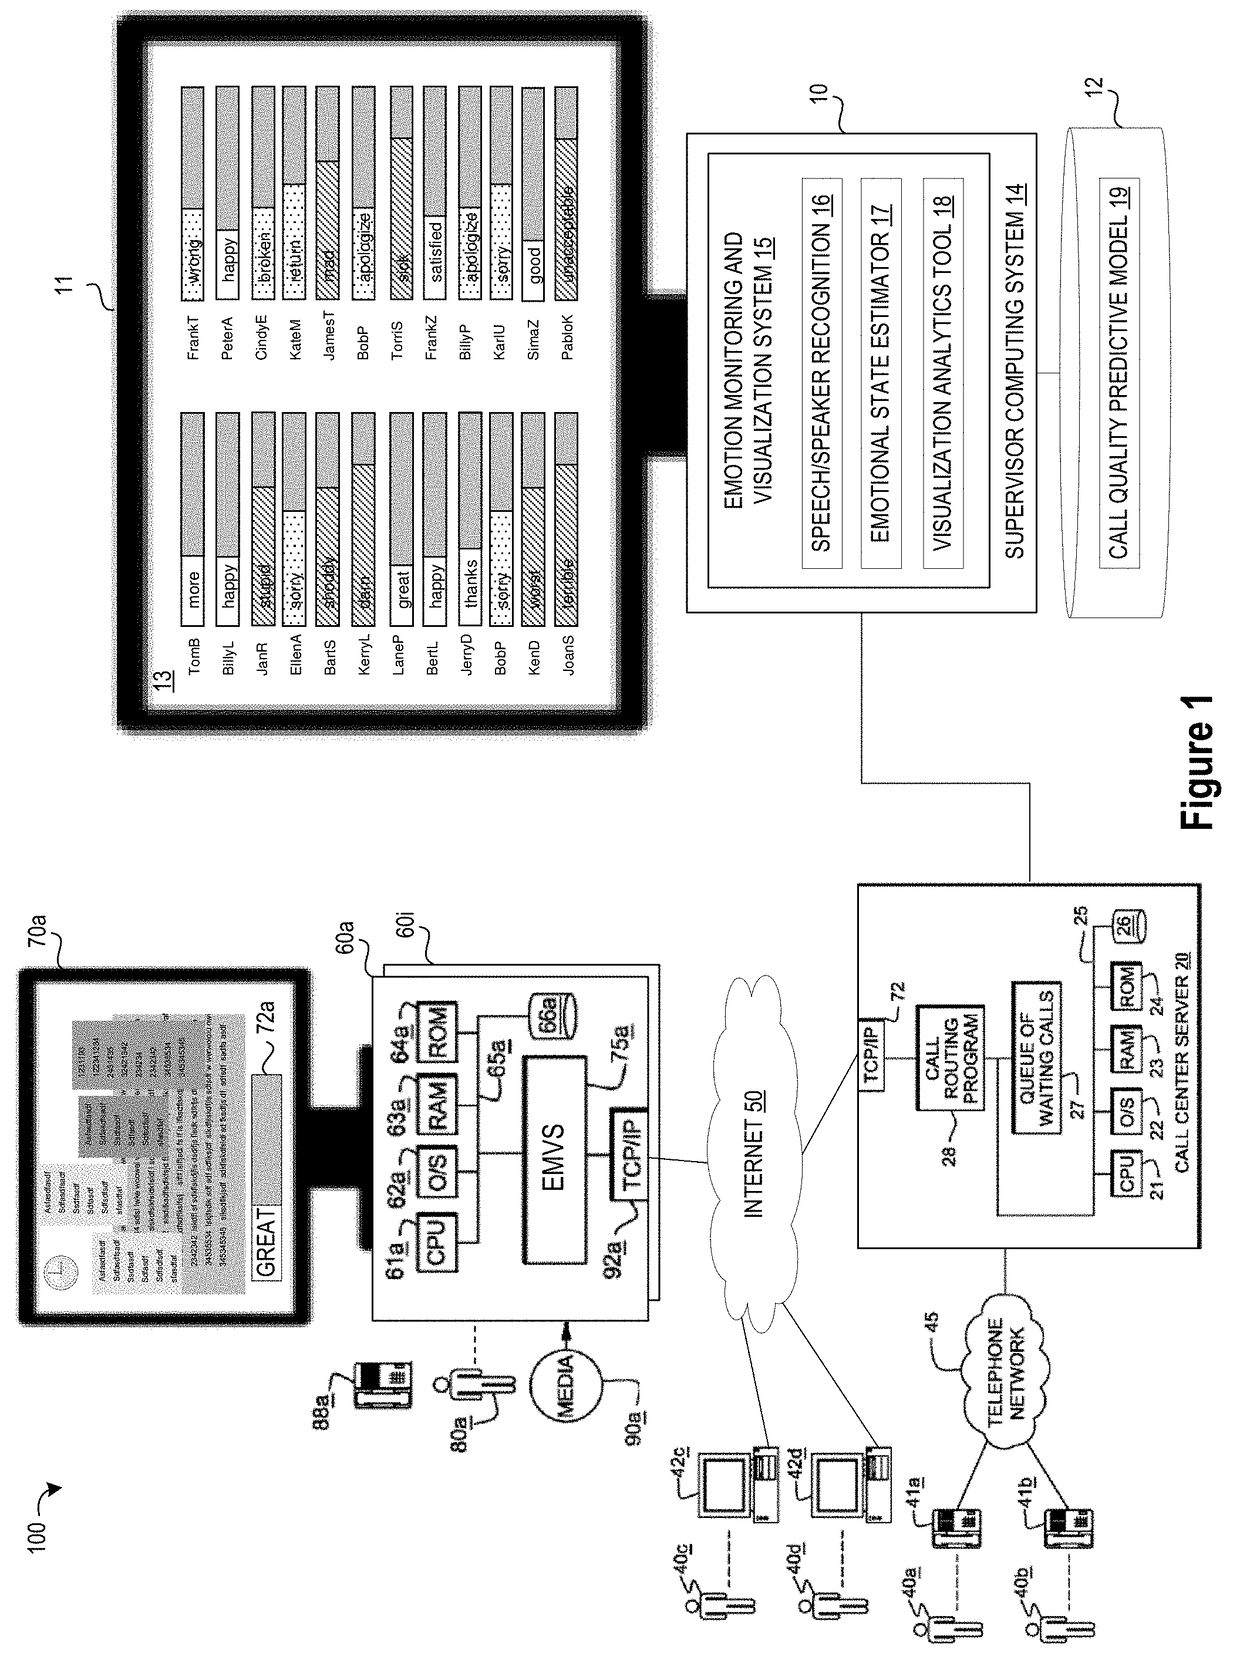 System and Method for Monitoring and Visualizing Emotions in Call Center Dialogs at Call Centers